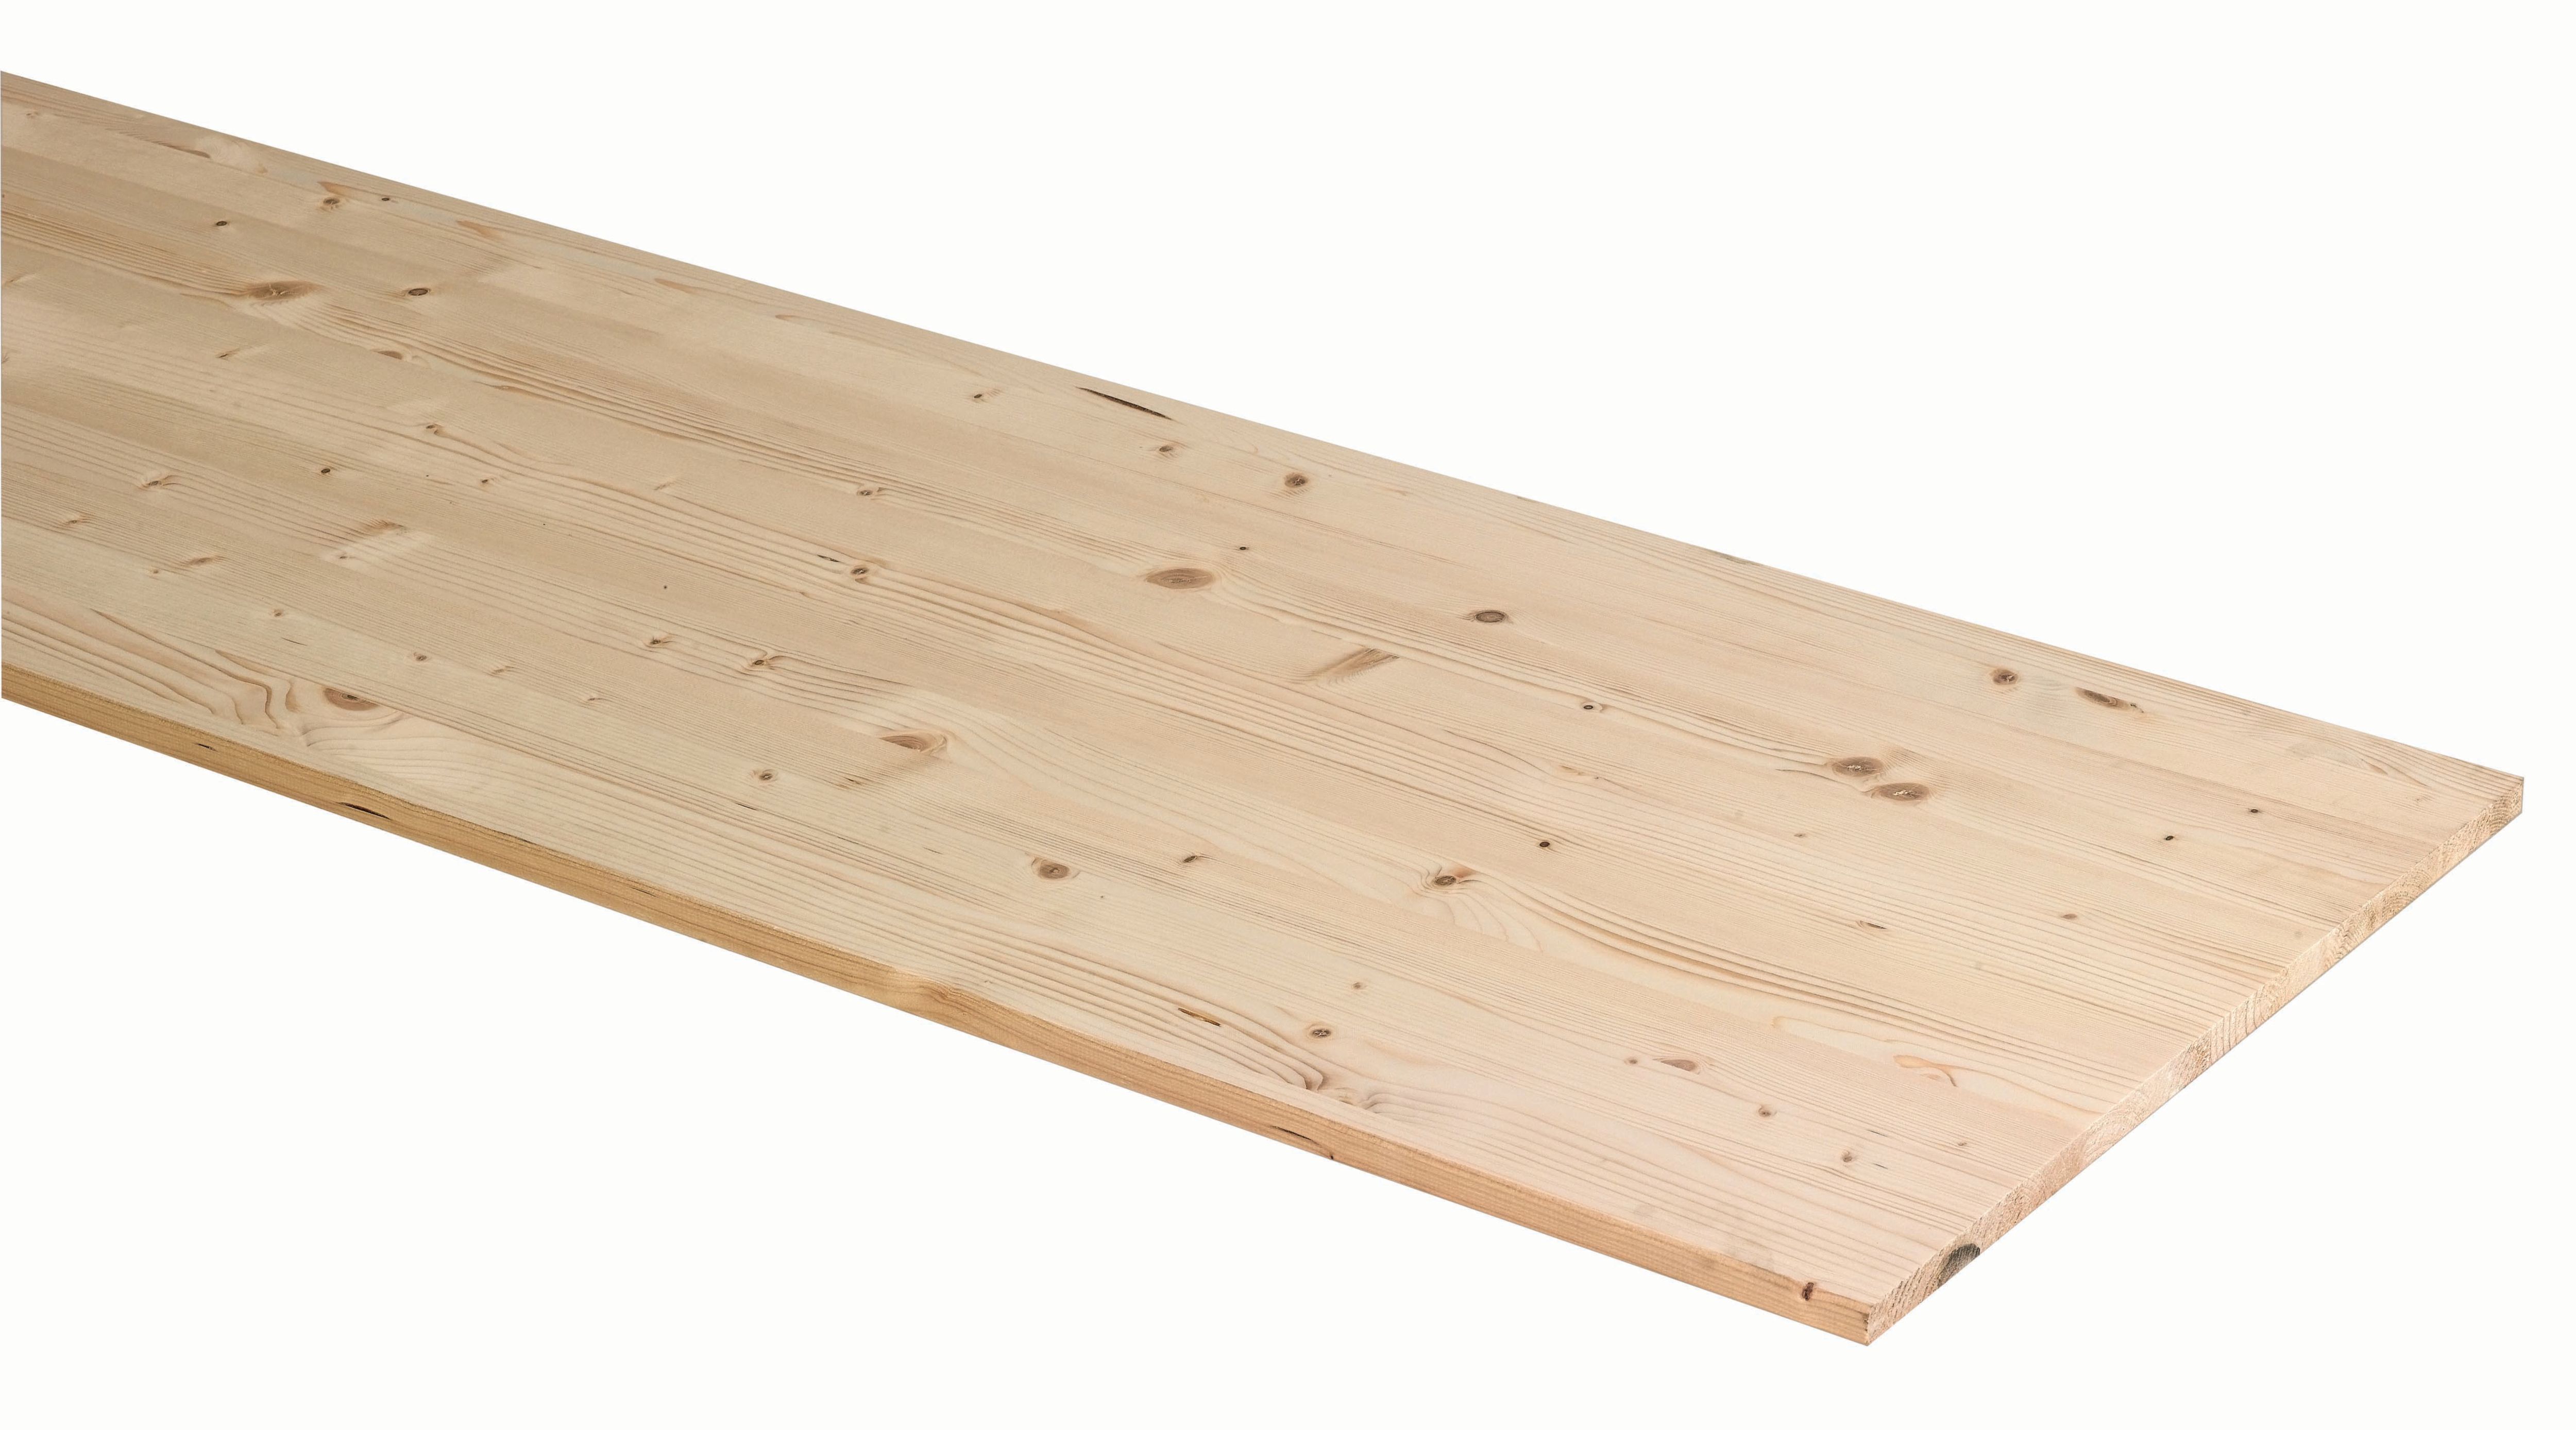 Image of Wickes General Purpose Spruce Timberboard - 18mm x 500mm x 1150mm